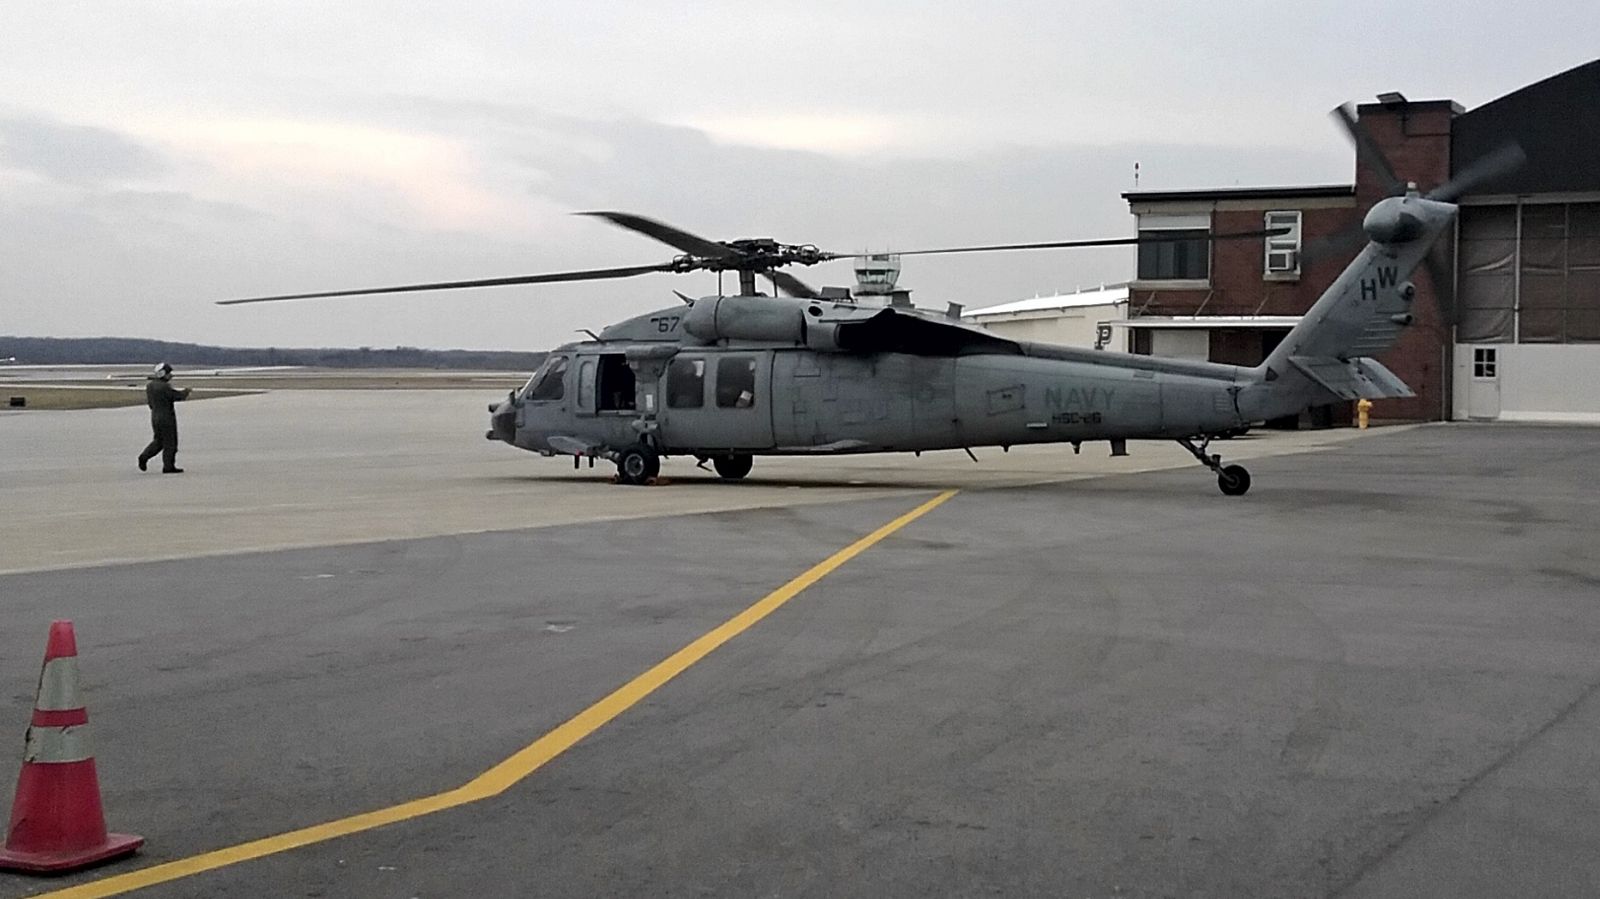 MH-60S Knighthawk at Purdue University Airport